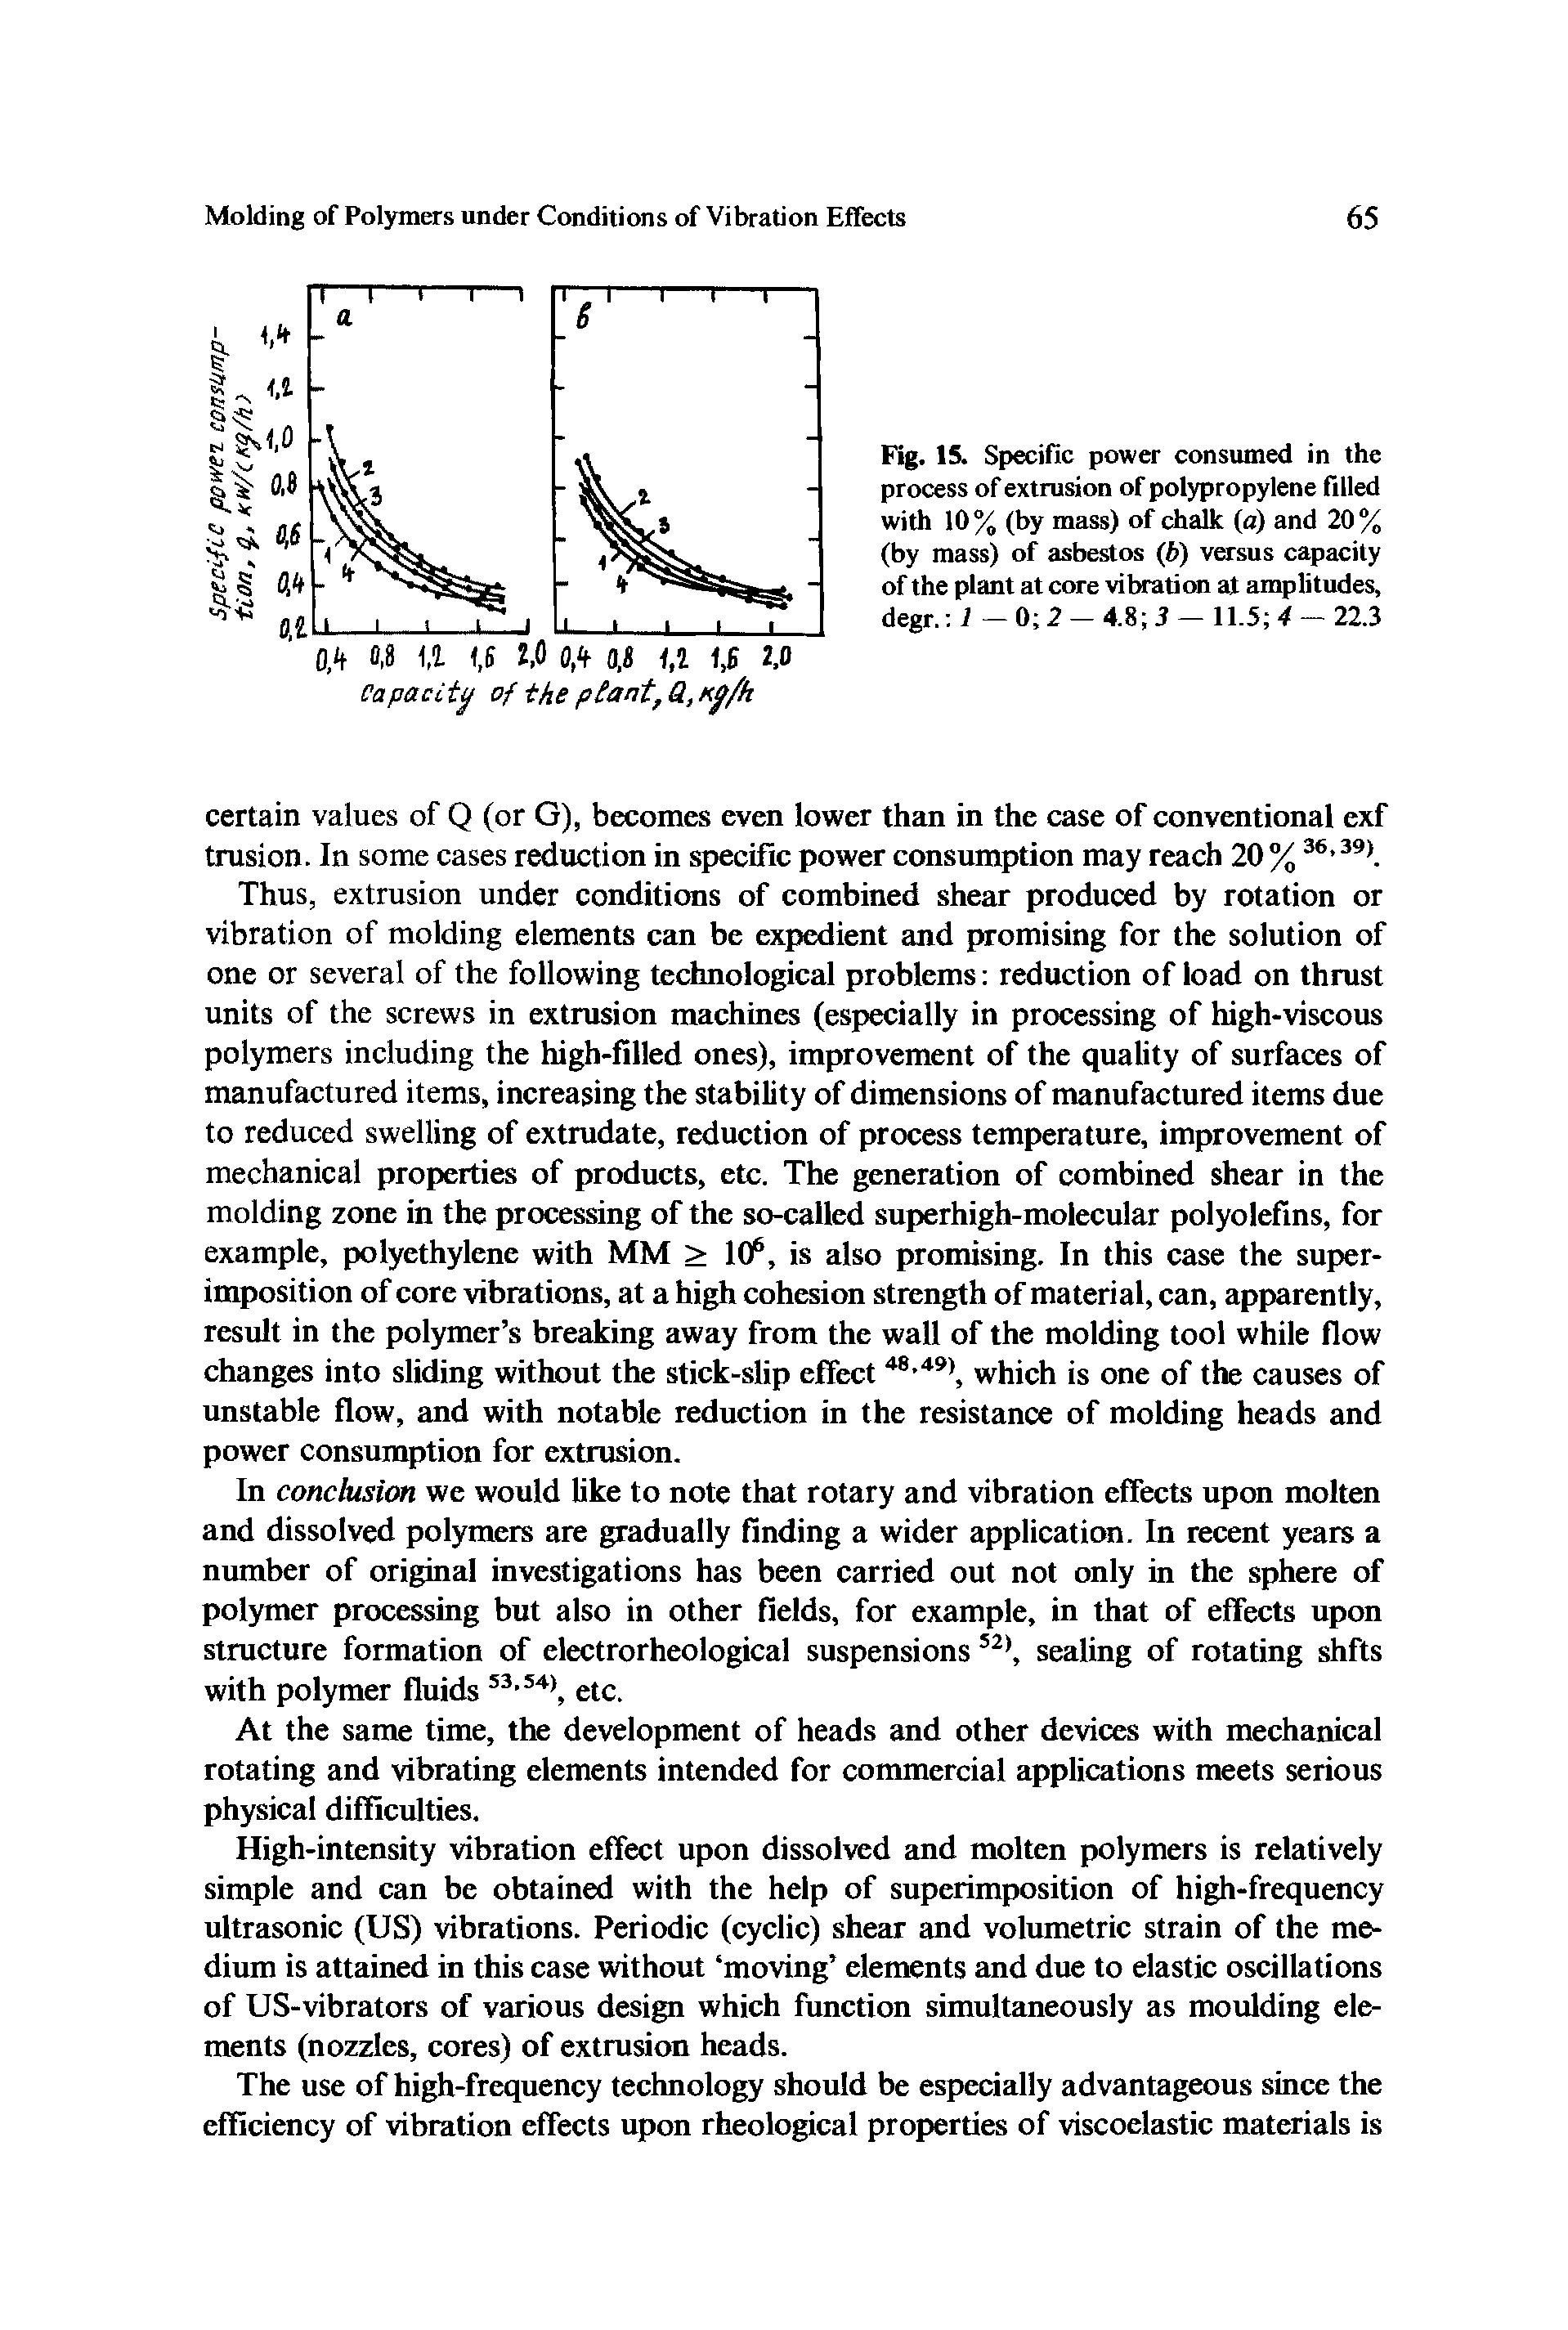 Fig. 15. Specific power consumed in the process of extrusion of polypropylene filled with 10% (by mass) of chalk (a) and 20% (by mass) of asbestos (b) versus capacity of the plant at core vibration at amplitudes, degr. 1 — 0 2 — 4.8 3 — 11.5 4 — 22.3...